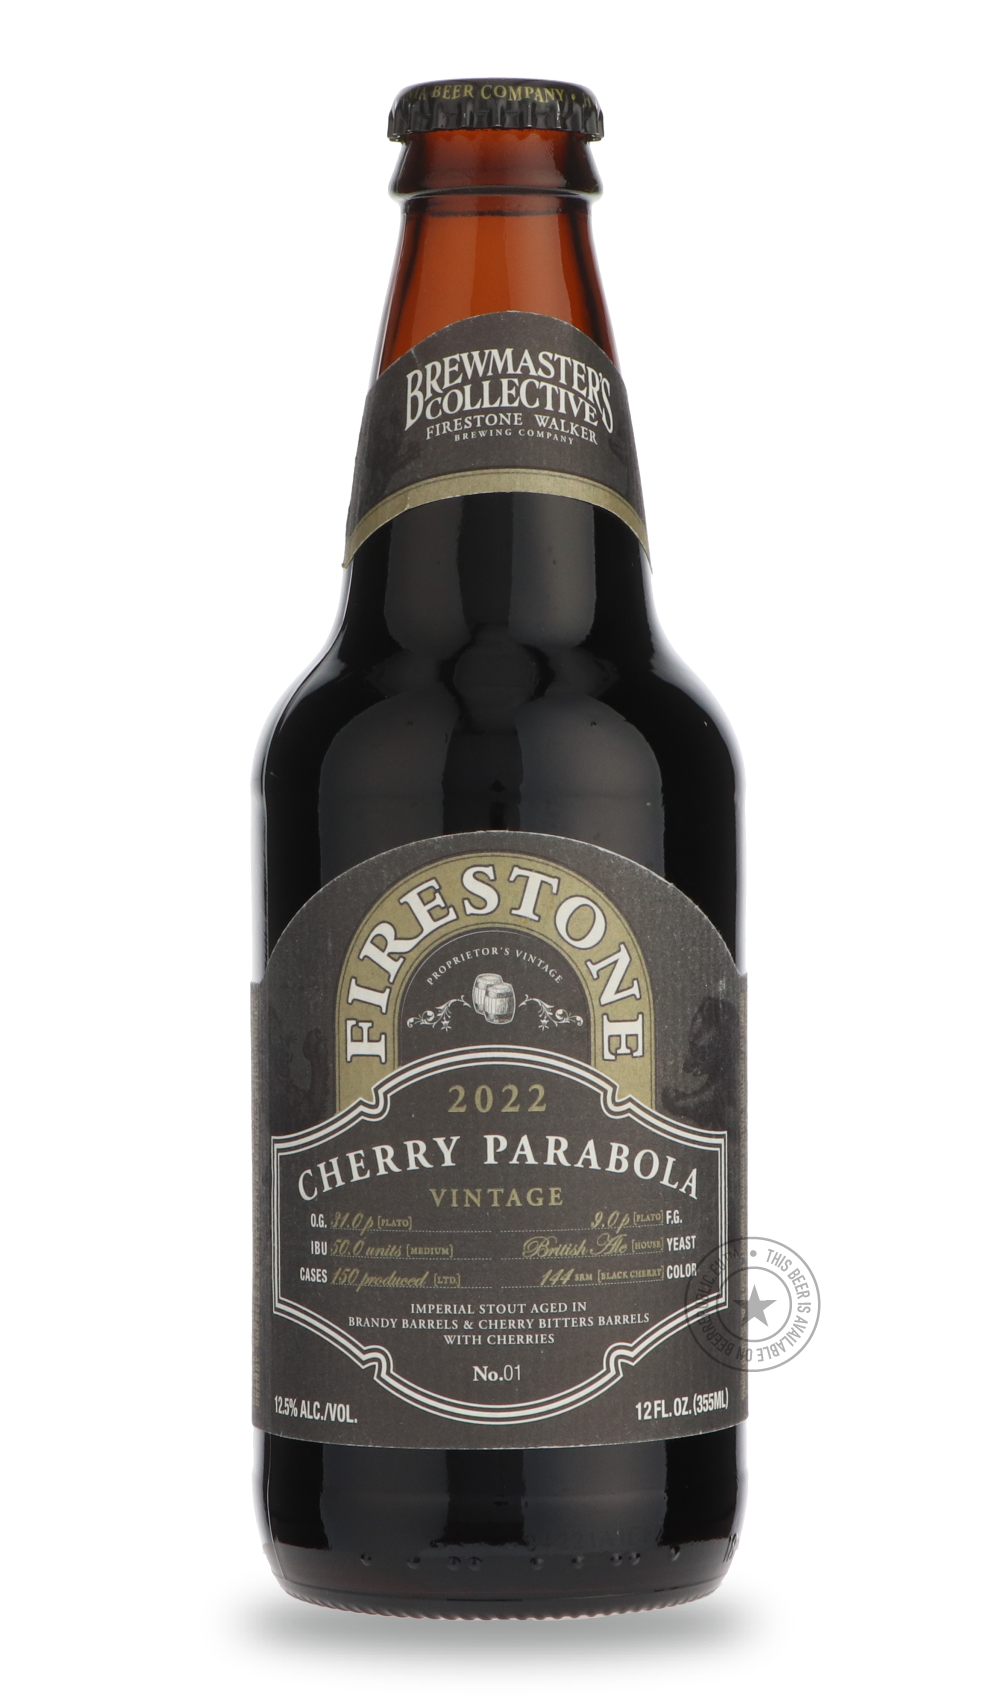 -Firestone Walker- Cherry Parabola-Stout & Porter- Only @ Beer Republic - The best online beer store for American & Canadian craft beer - Buy beer online from the USA and Canada - Bier online kopen - Amerikaans bier kopen - Craft beer store - Craft beer kopen - Amerikanisch bier kaufen - Bier online kaufen - Acheter biere online - IPA - Stout - Porter - New England IPA - Hazy IPA - Imperial Stout - Barrel Aged - Barrel Aged Imperial Stout - Brown - Dark beer - Blond - Blonde - Pilsner - Lager - Wheat - Weiz